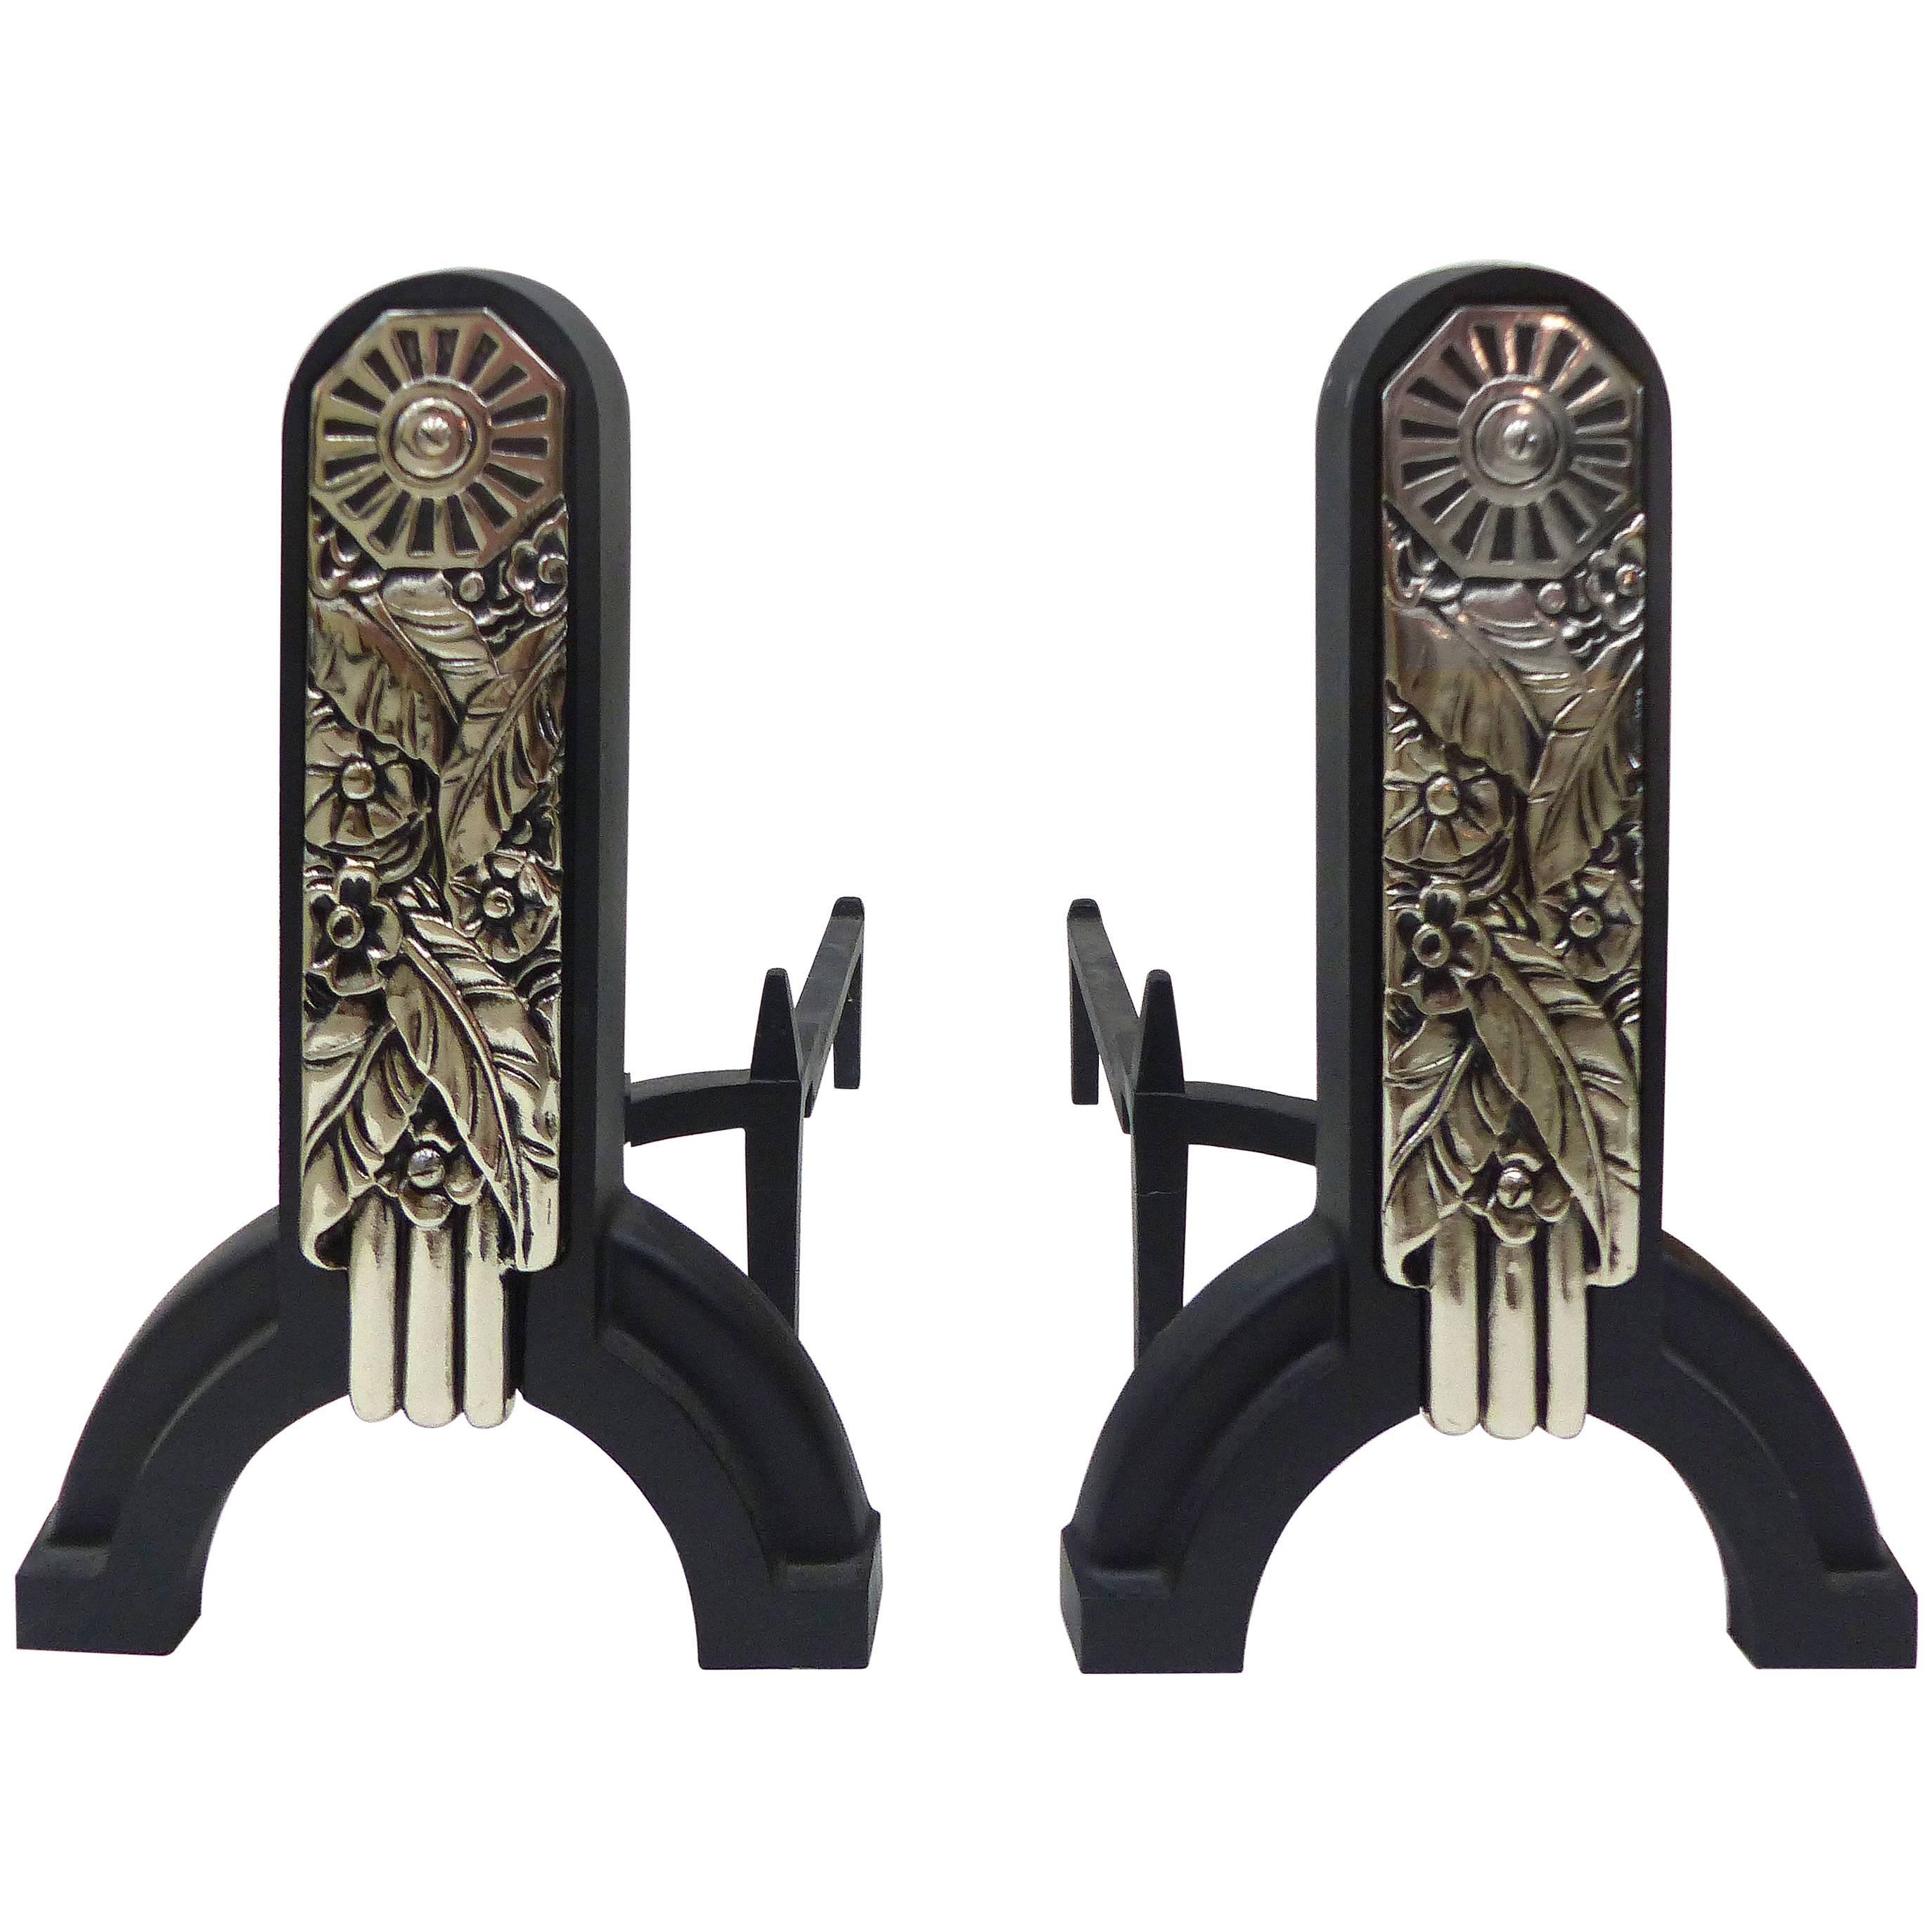 Art Deco Andirons with Iconic Chrome Floral Design Panels